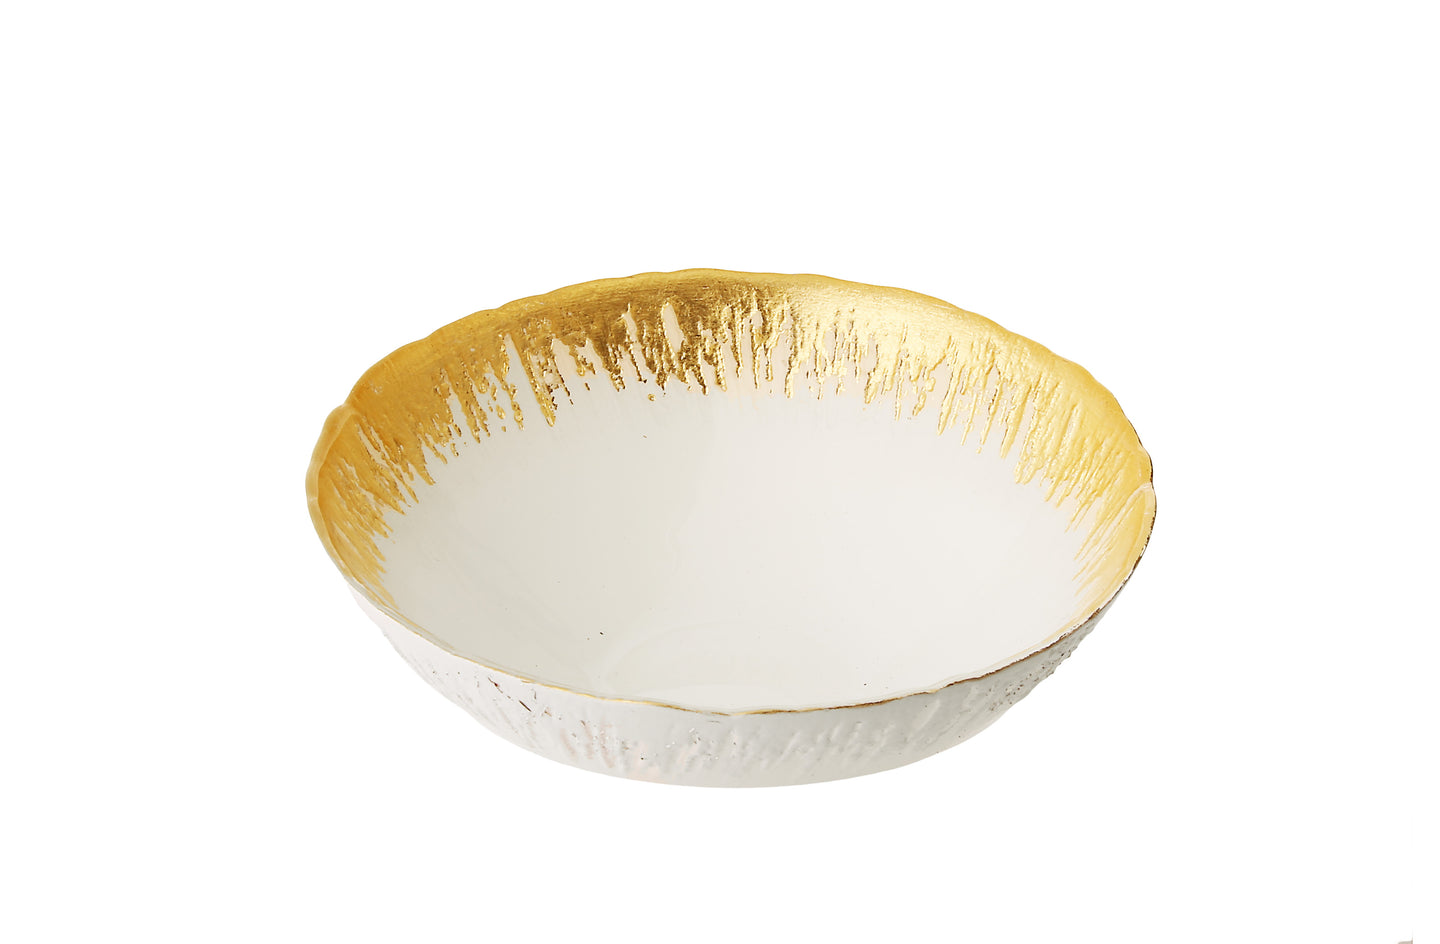 Individual Opaque White Bowls With Flashy Gold Design